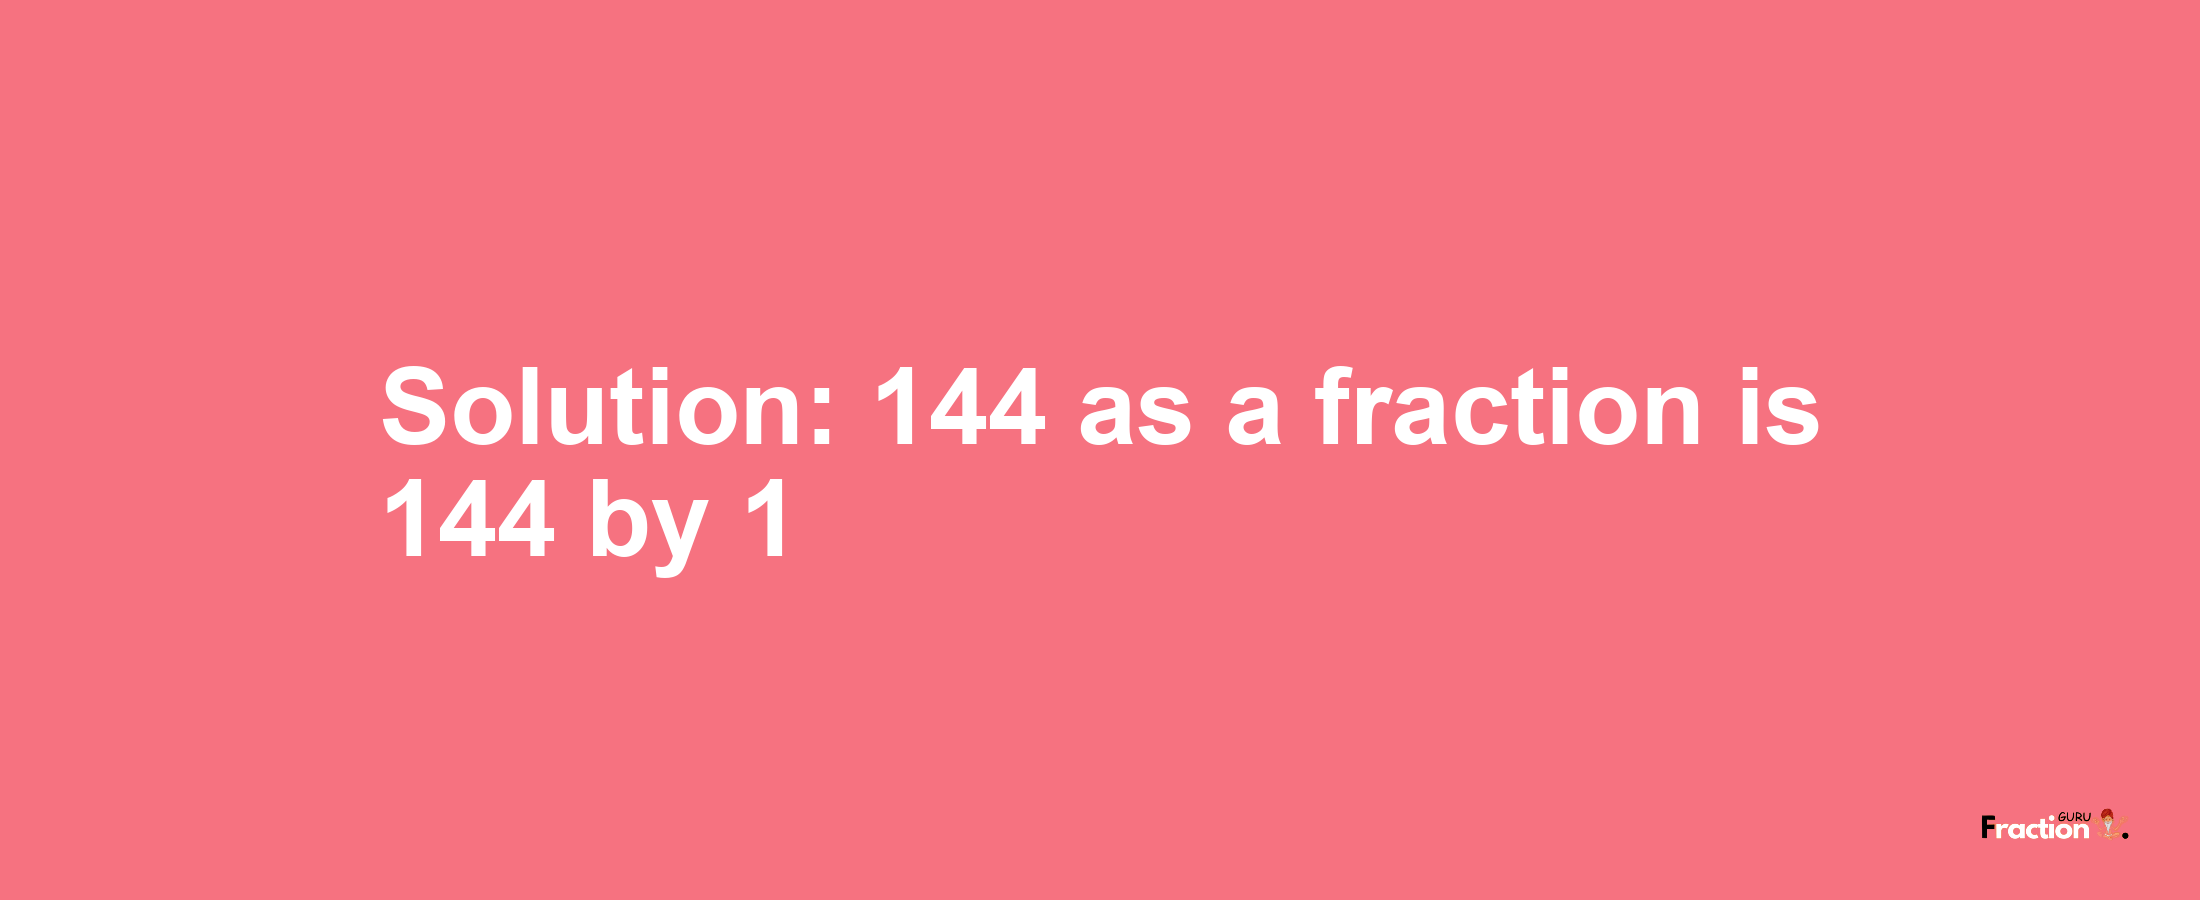 Solution:144 as a fraction is 144/1